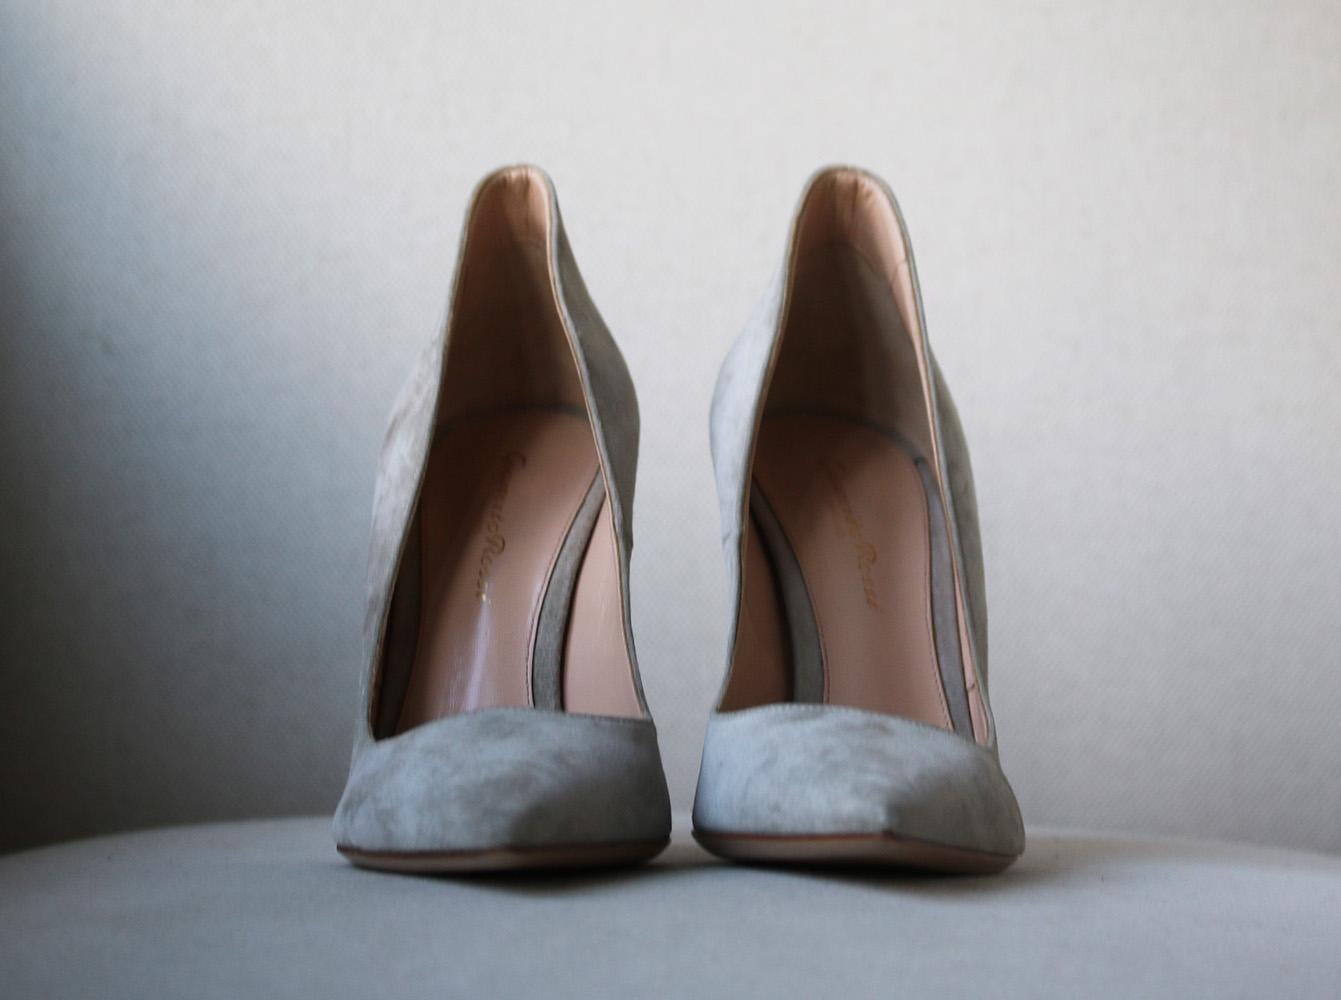 Gianvito Rossi has designed countless beautiful shoes over the years, but he says these 'Ellipsis' pumps are one of his favorites for their simplicity. Defined by an ultra pointy toe and slender stiletto heel, they're made from textured light grey